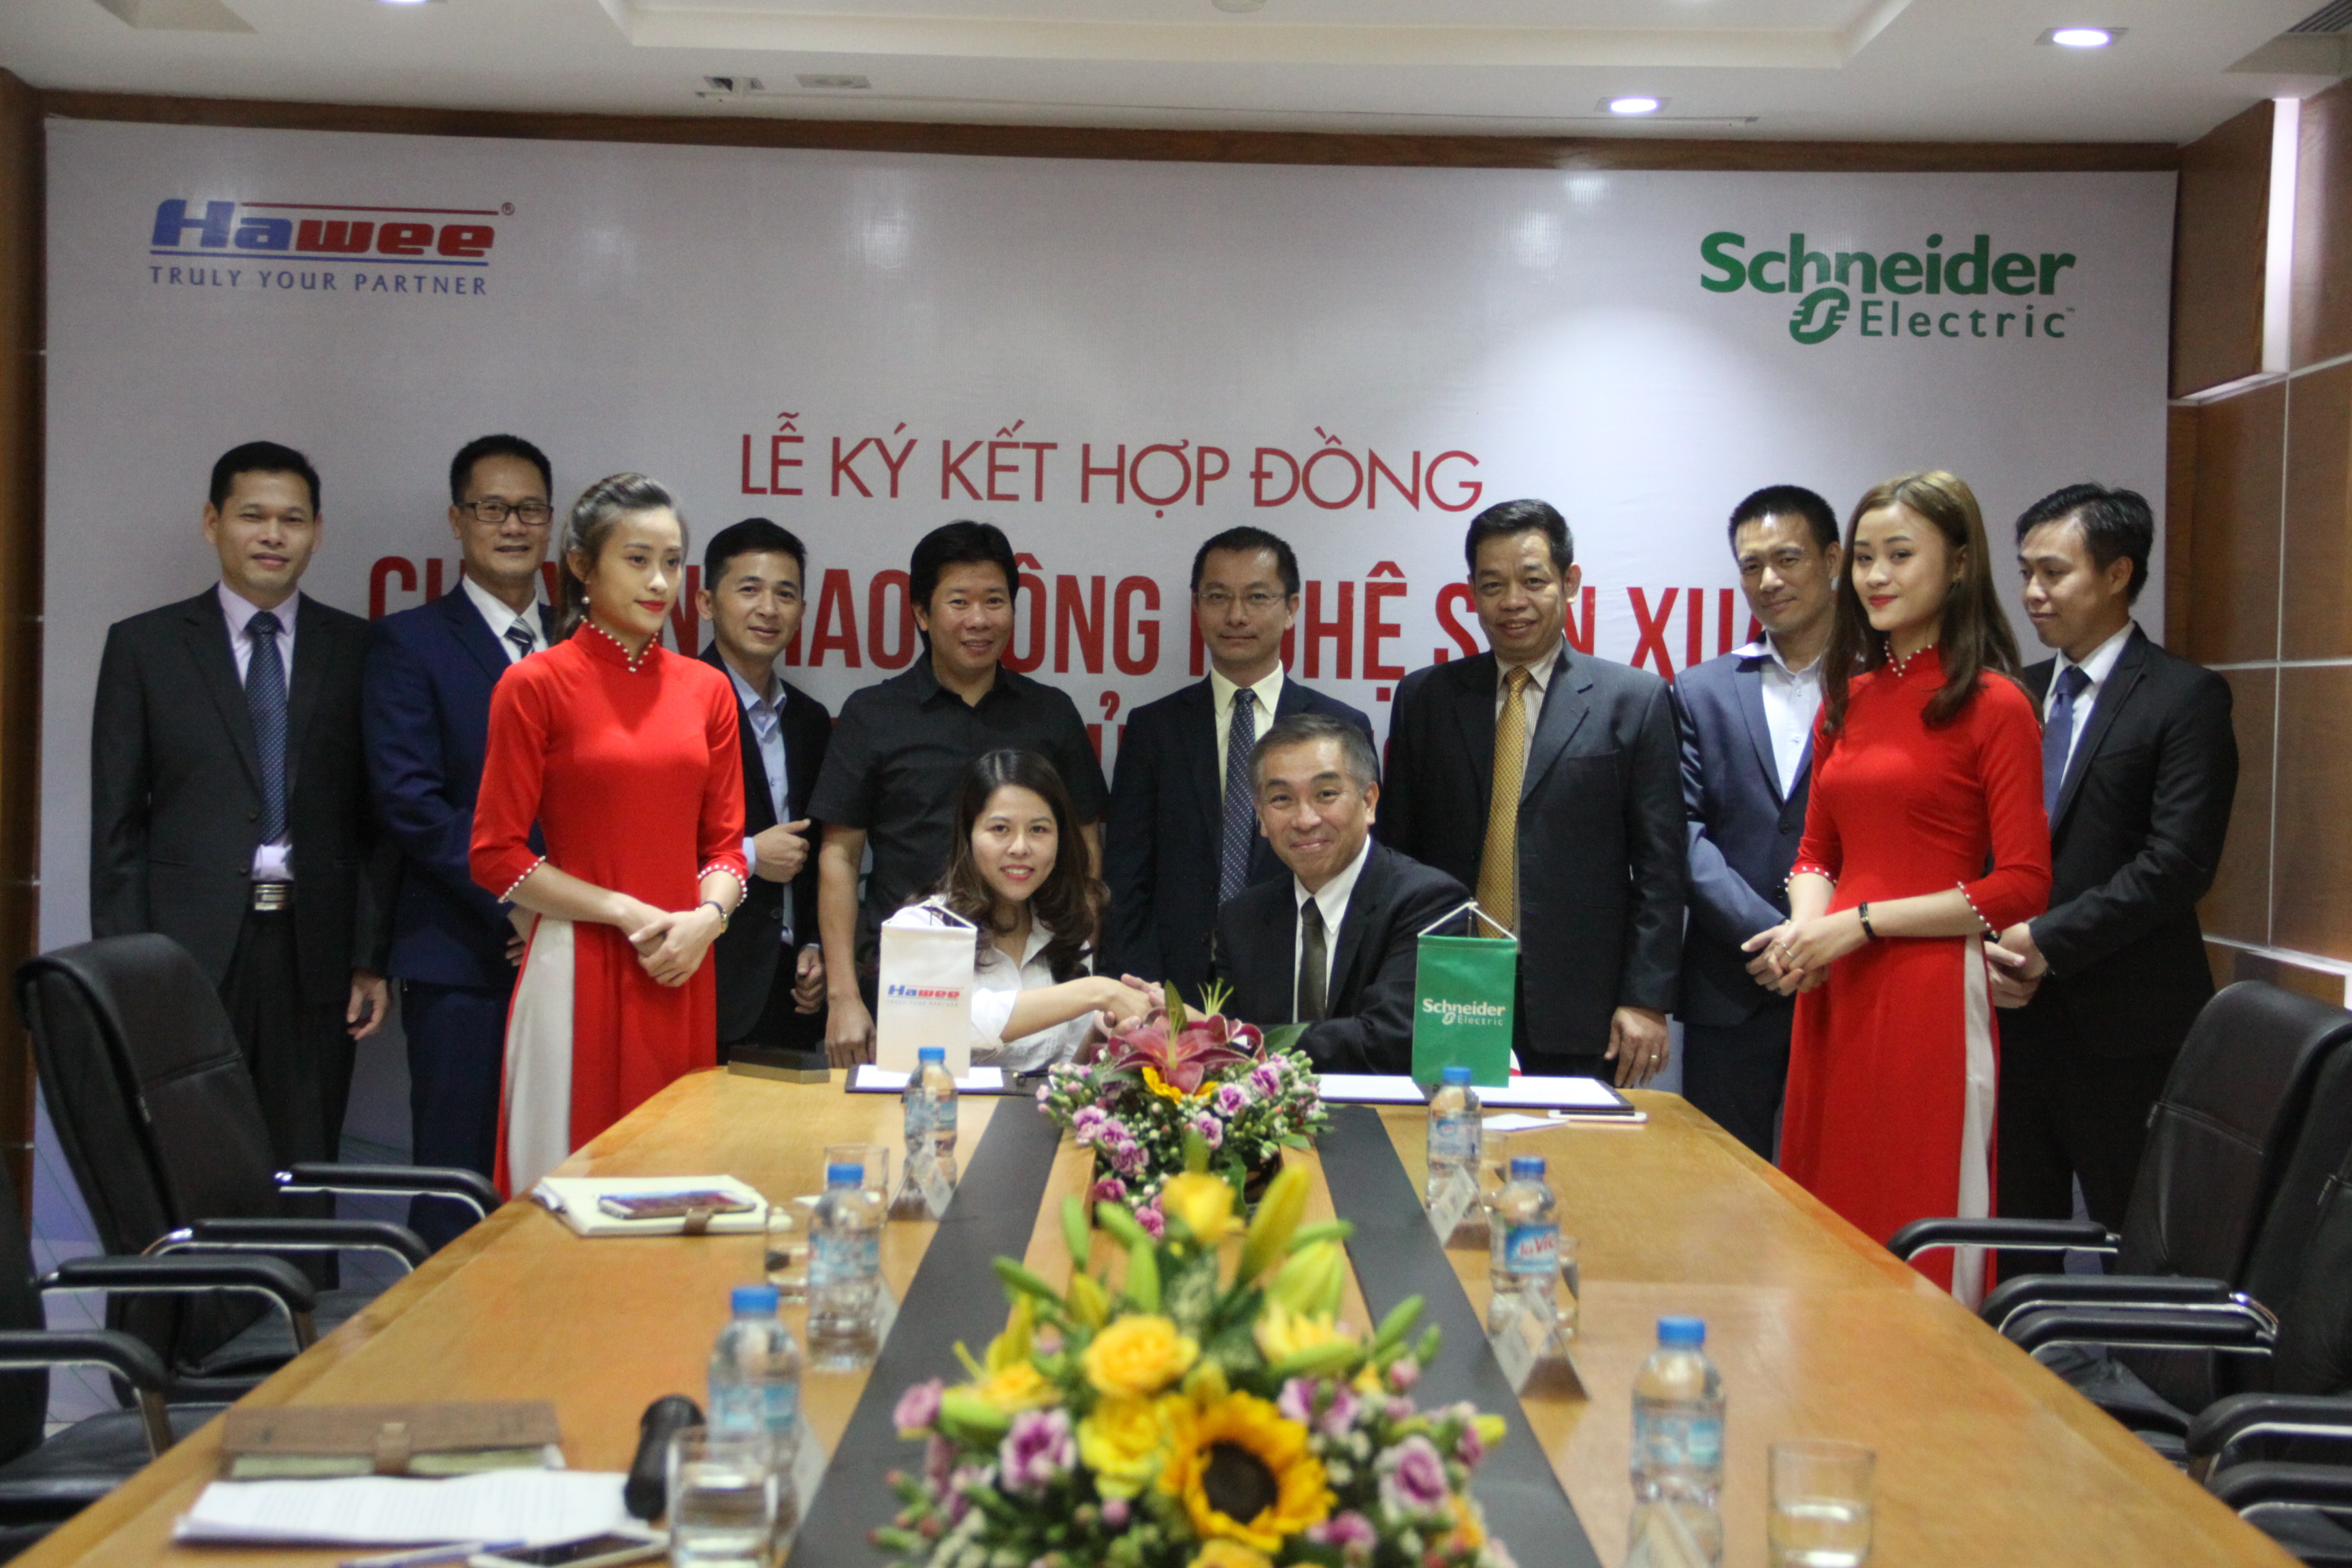 Schneider Electric and Hawee enter collaborative technology license deal